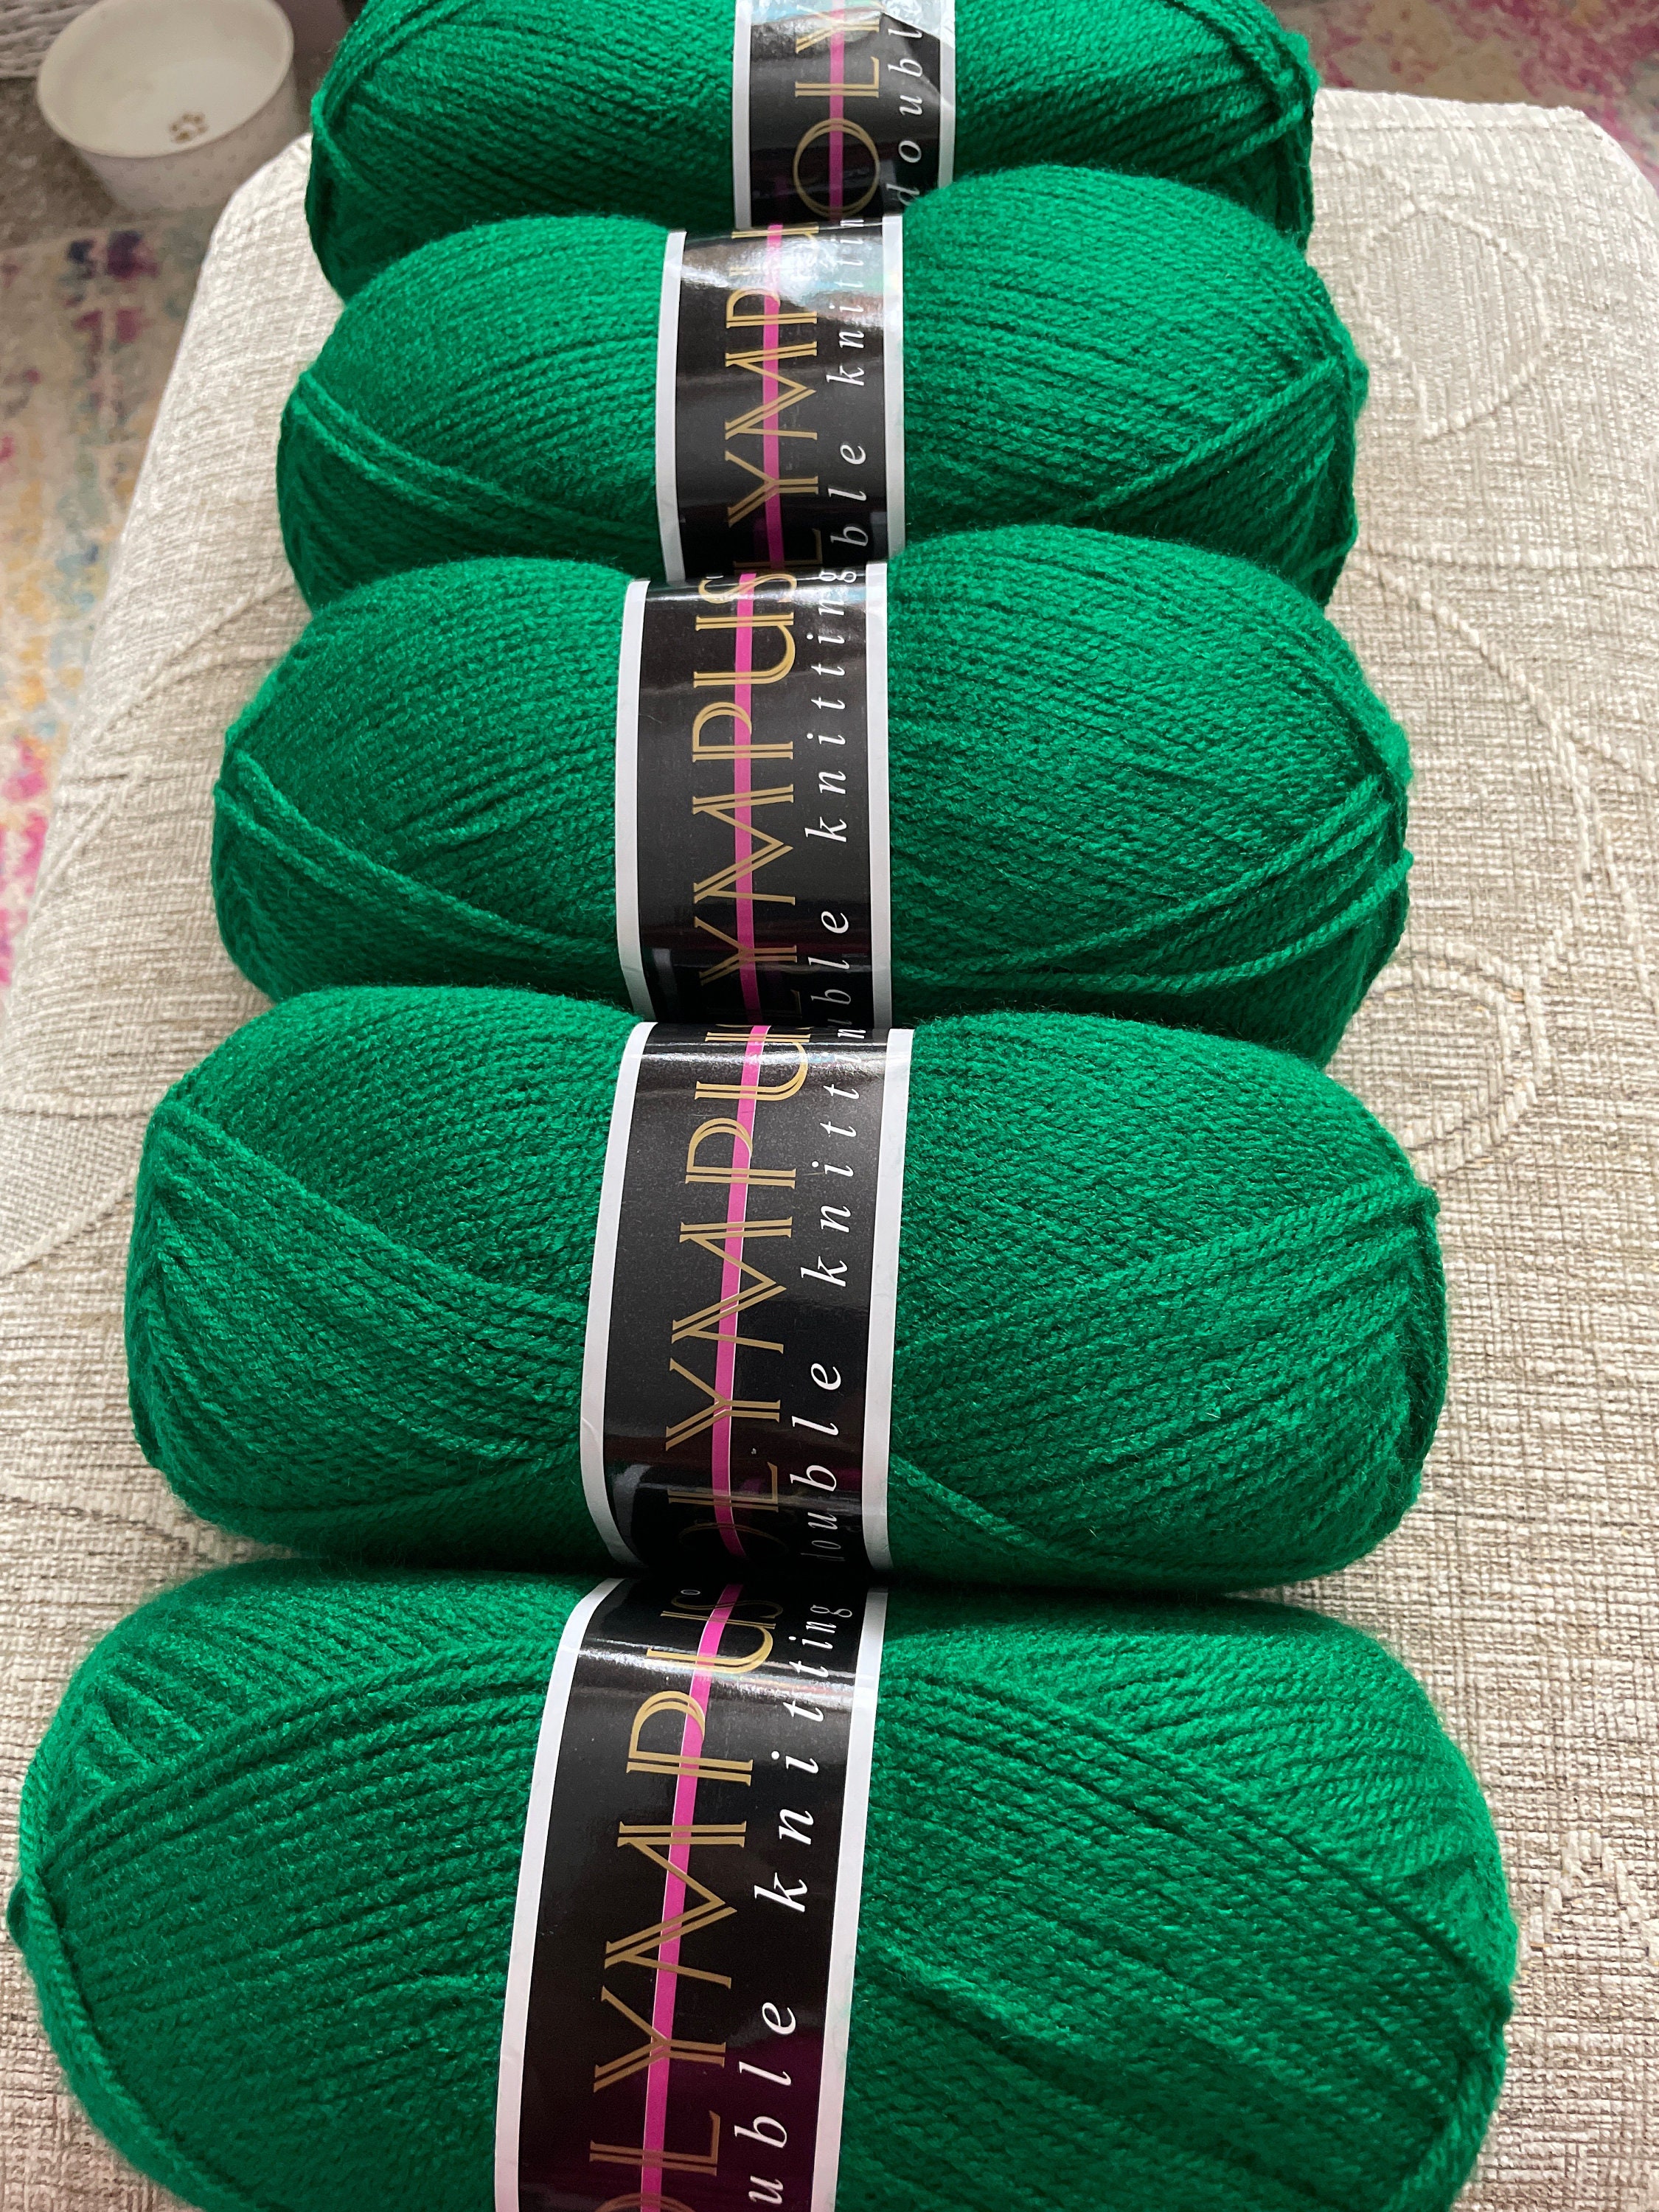 Mandala Crafts Green Metallic Embroidery Thread Set - Green Metallic Thread for Sewing Machine and Hand Decorative Sewing - 218 Yards 200m Green